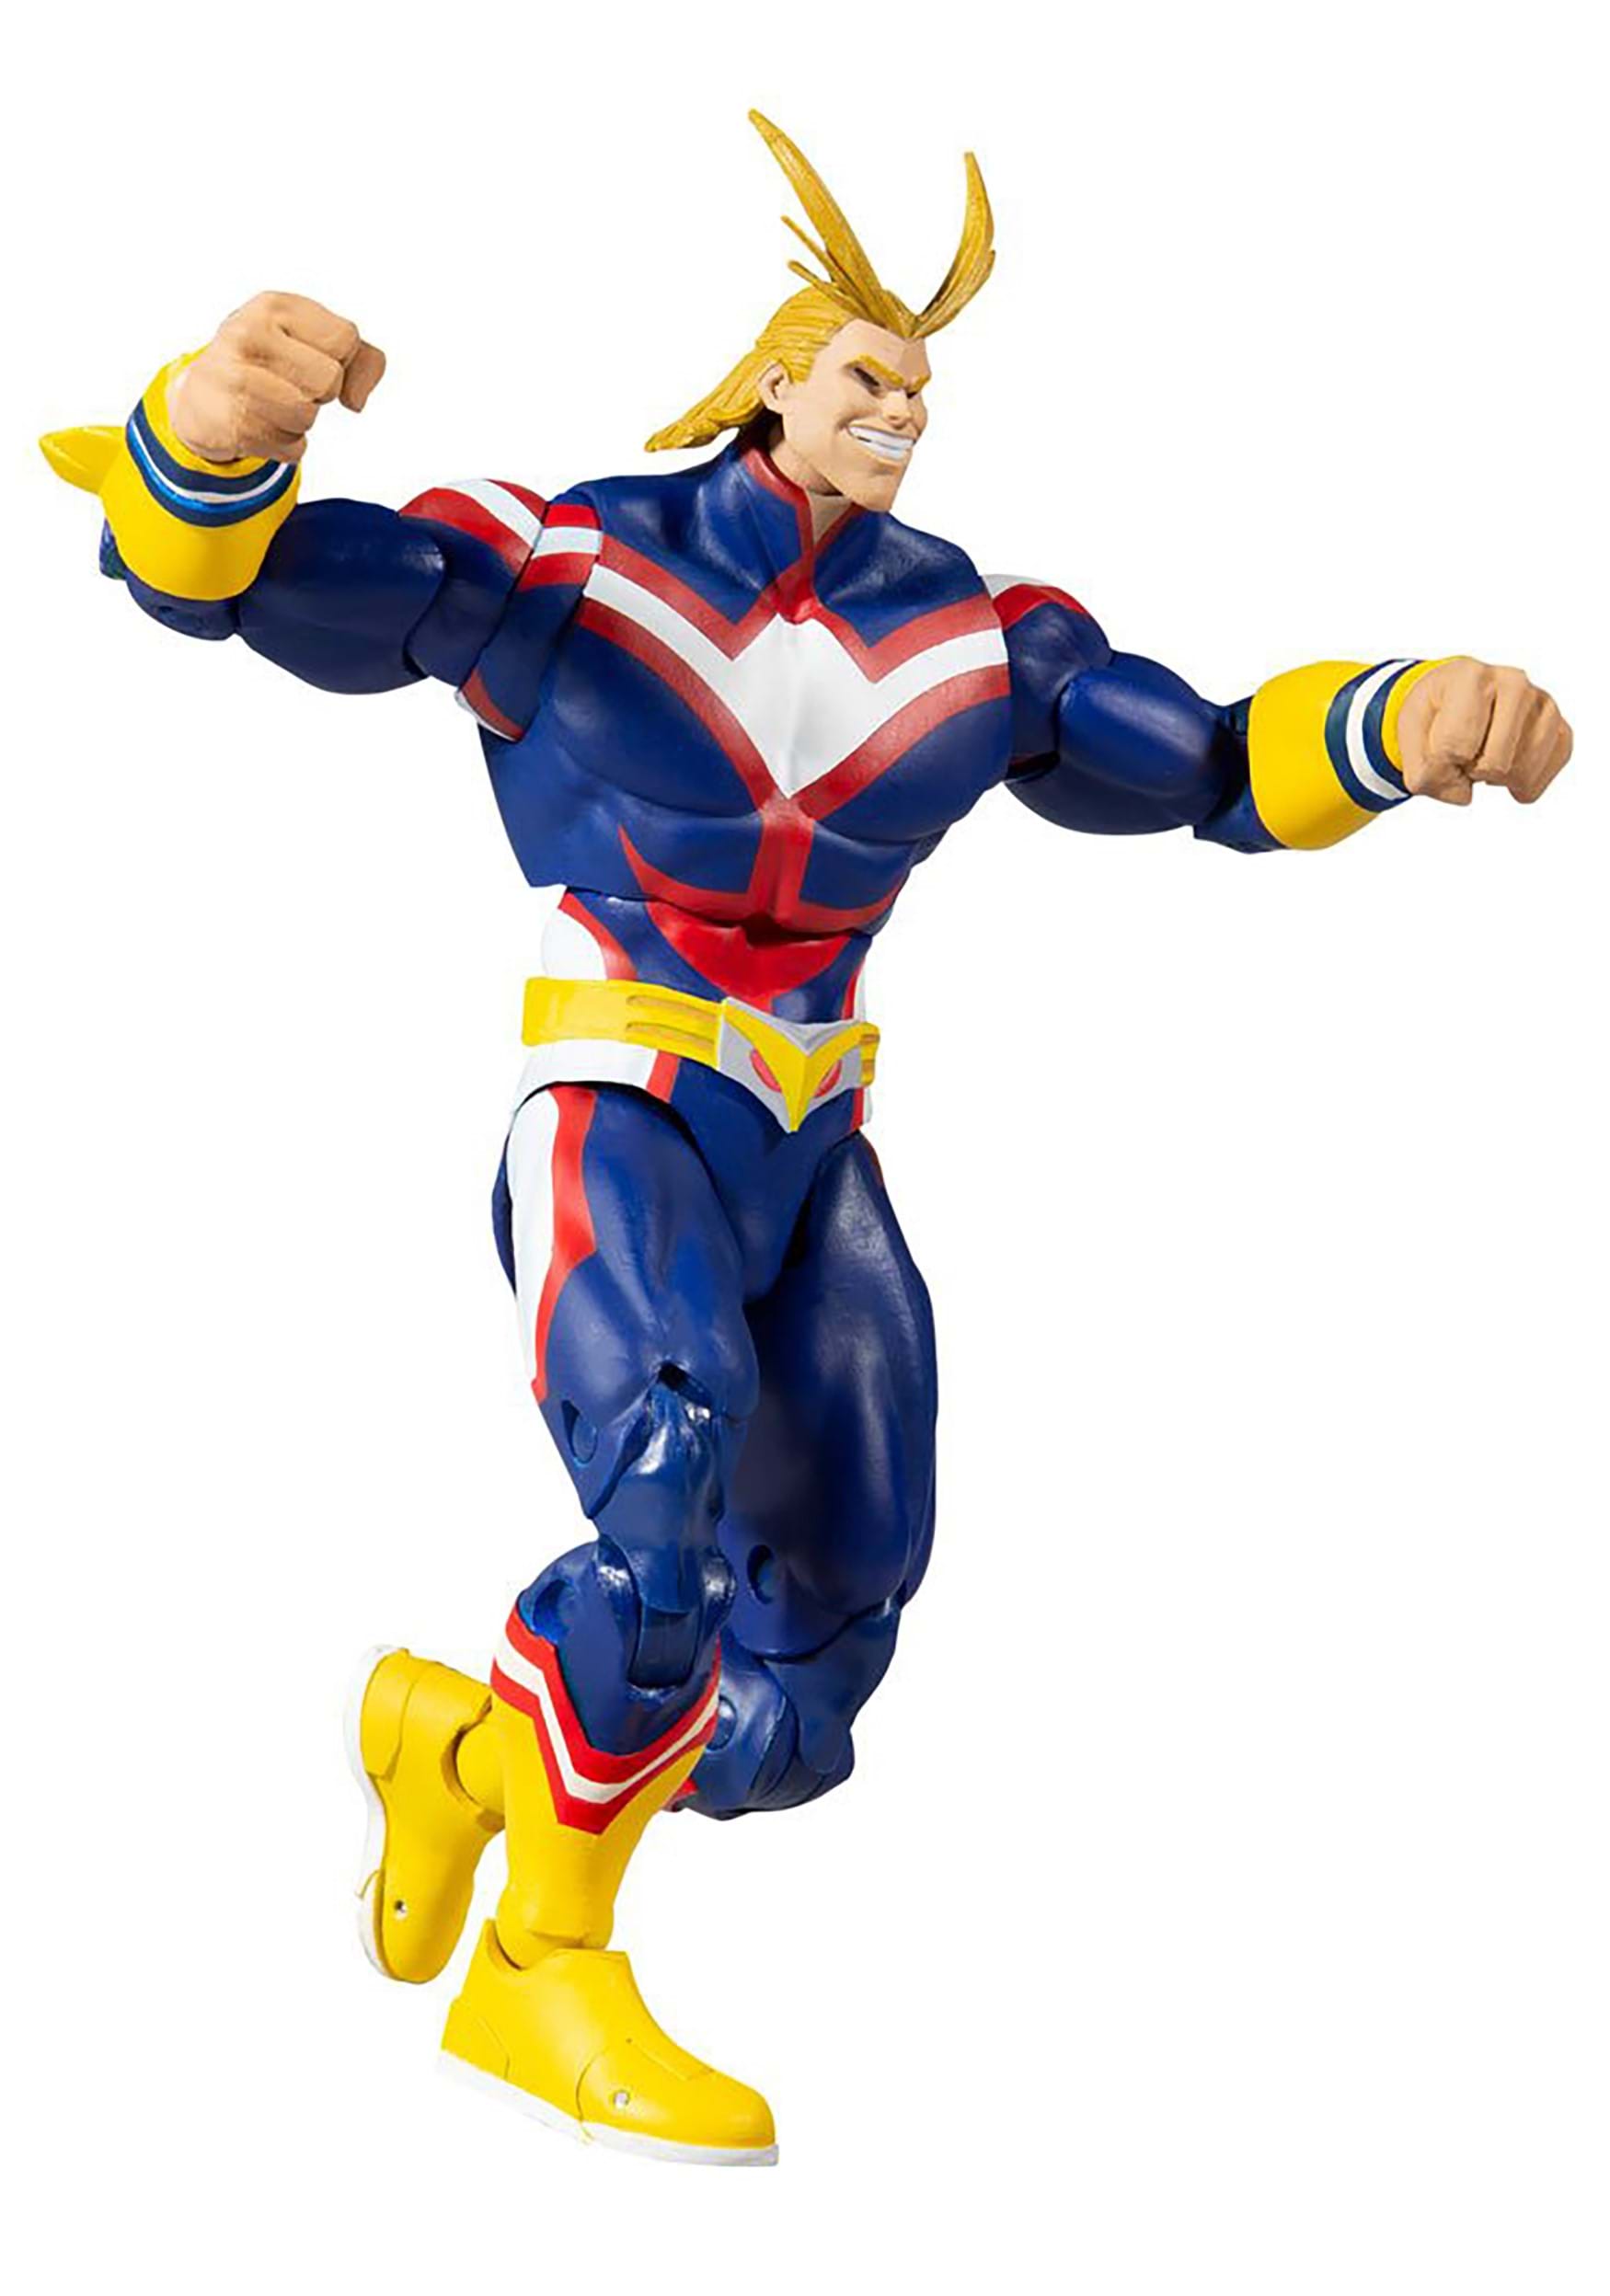 MHA All Might Vs All For One 7-Inch 2-Pack Figure